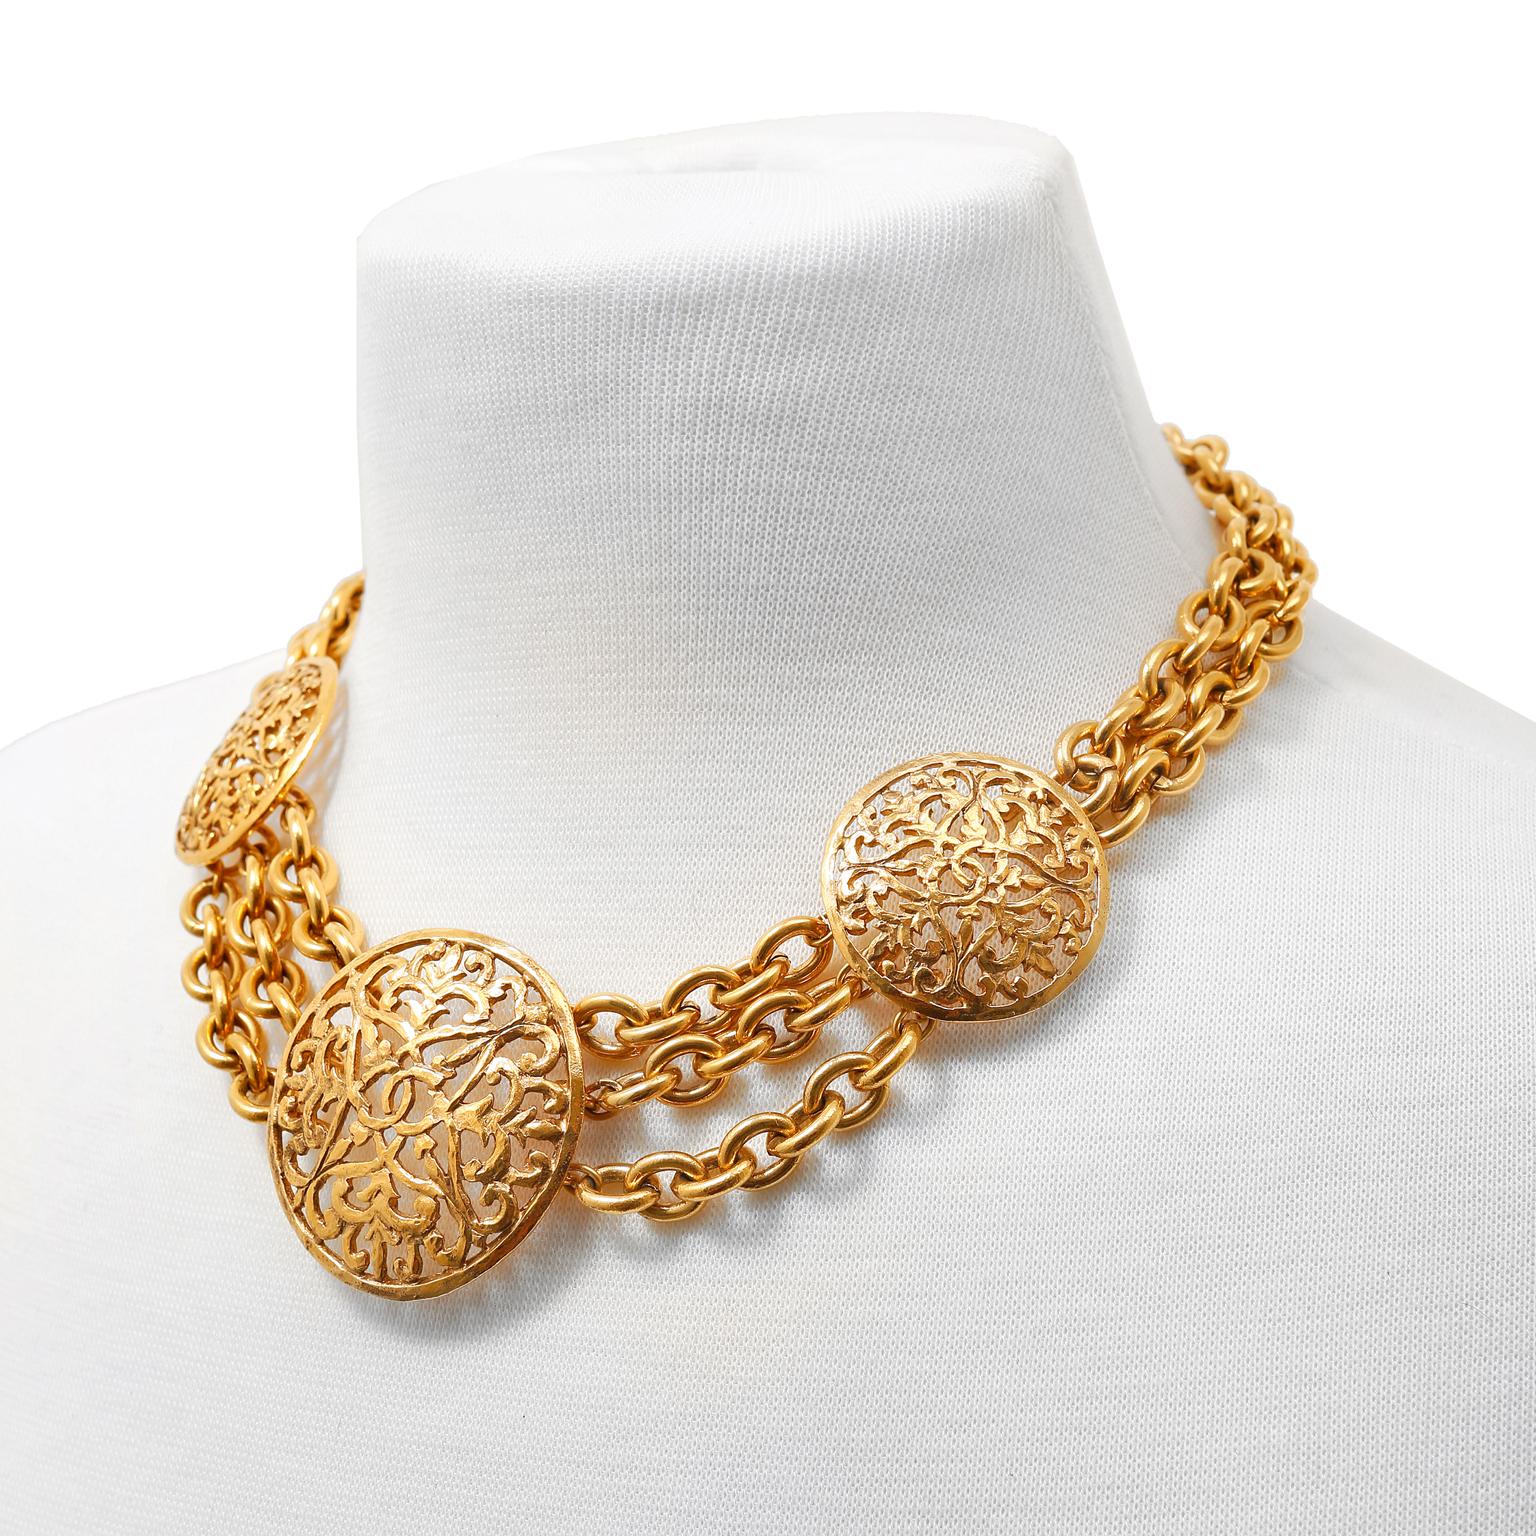 This authentic Chanel Gold CC Disc Multi Strand Choker is in excellent condition.  Gold plated ornate open work discs are situated on 24 karat gold plated linked chains.   Adjustable length approximately 19 inches.
PBF 11357

